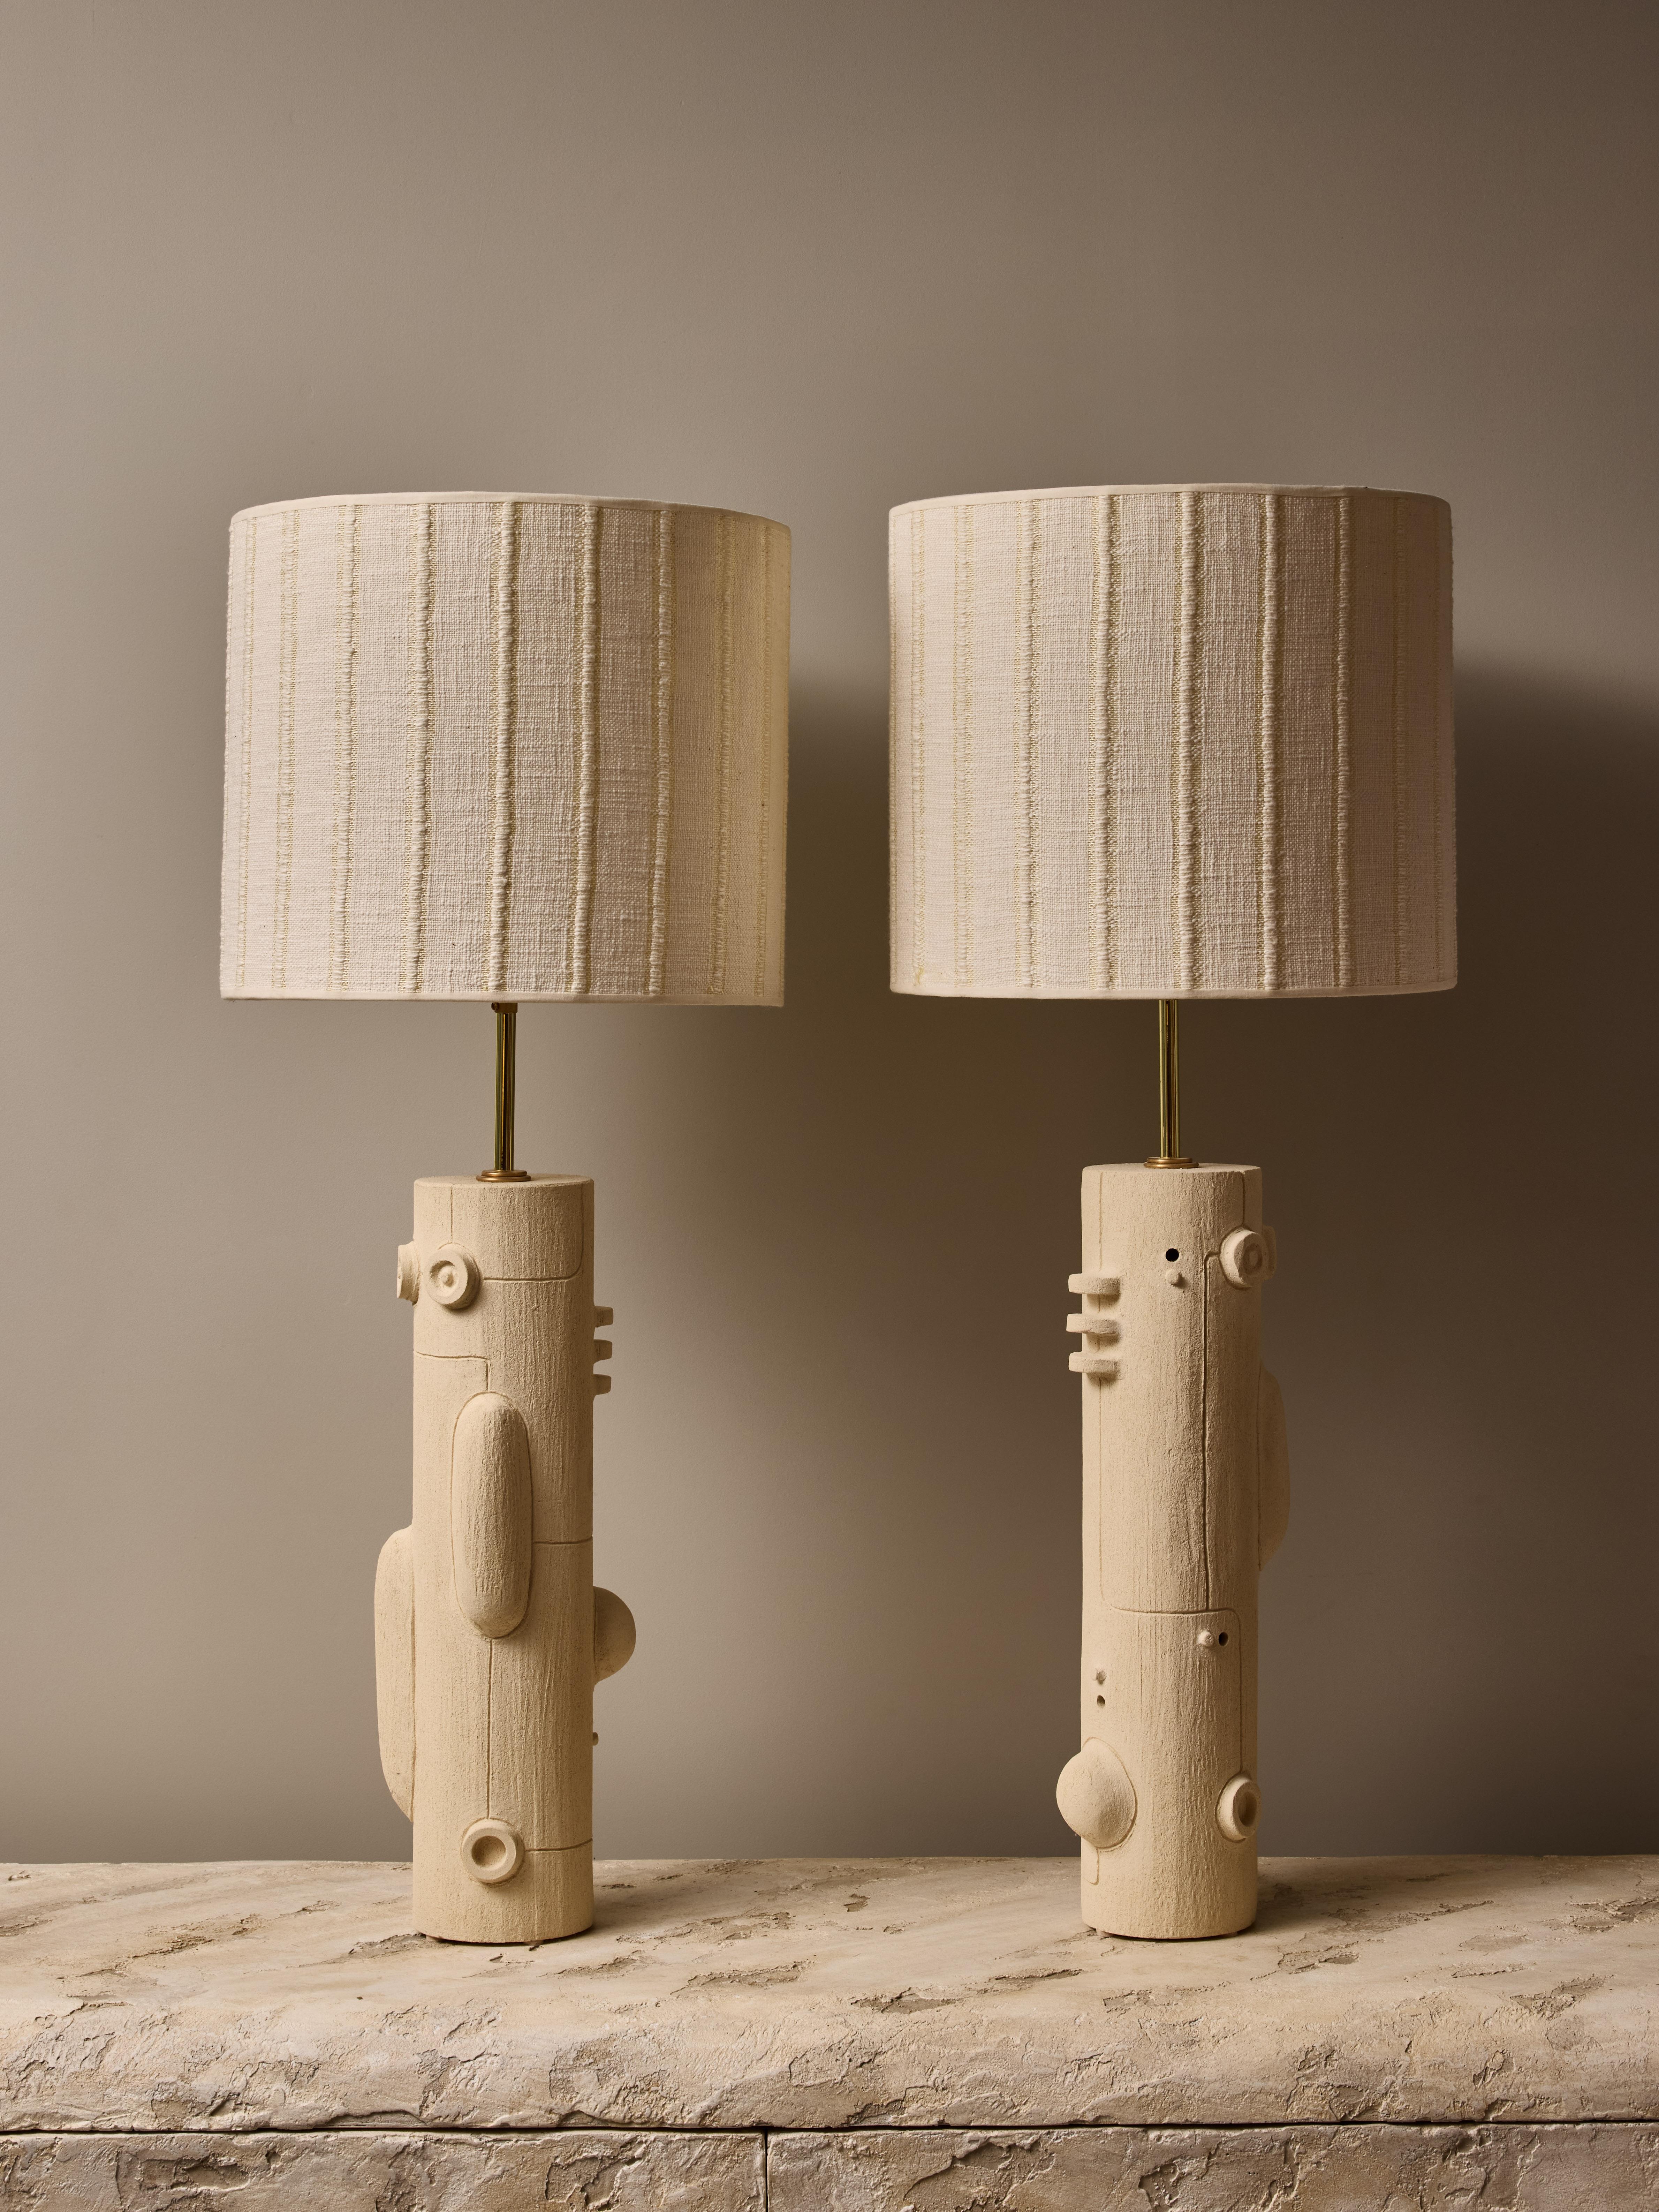 Pair of ceramic table lamps by the talented french contemporary artist Olivia Cognet.

These thin tubular shape lamps have mirrored maze design with soft geometrical shapes and thin lines, brass hardware and topped with a custom lampshade.

Stamped